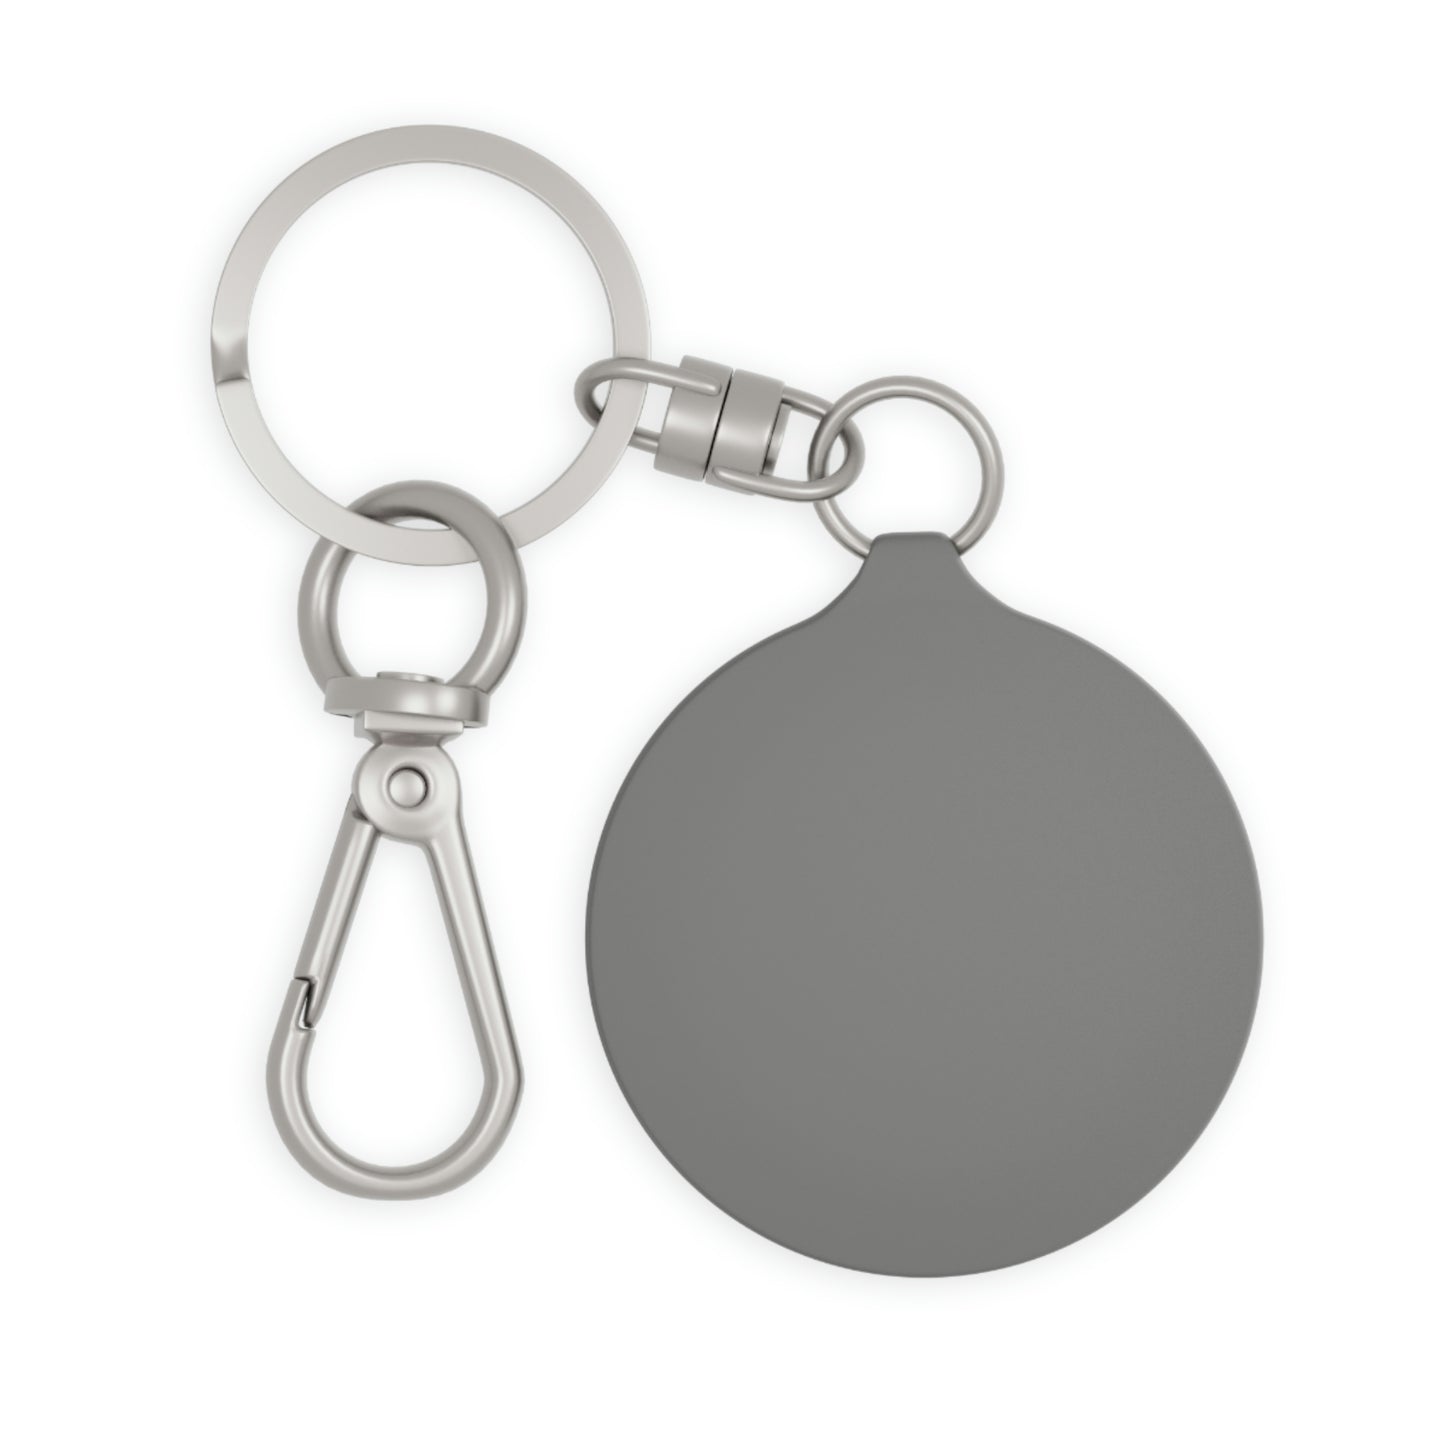 Lost in Thought Keyring Tag